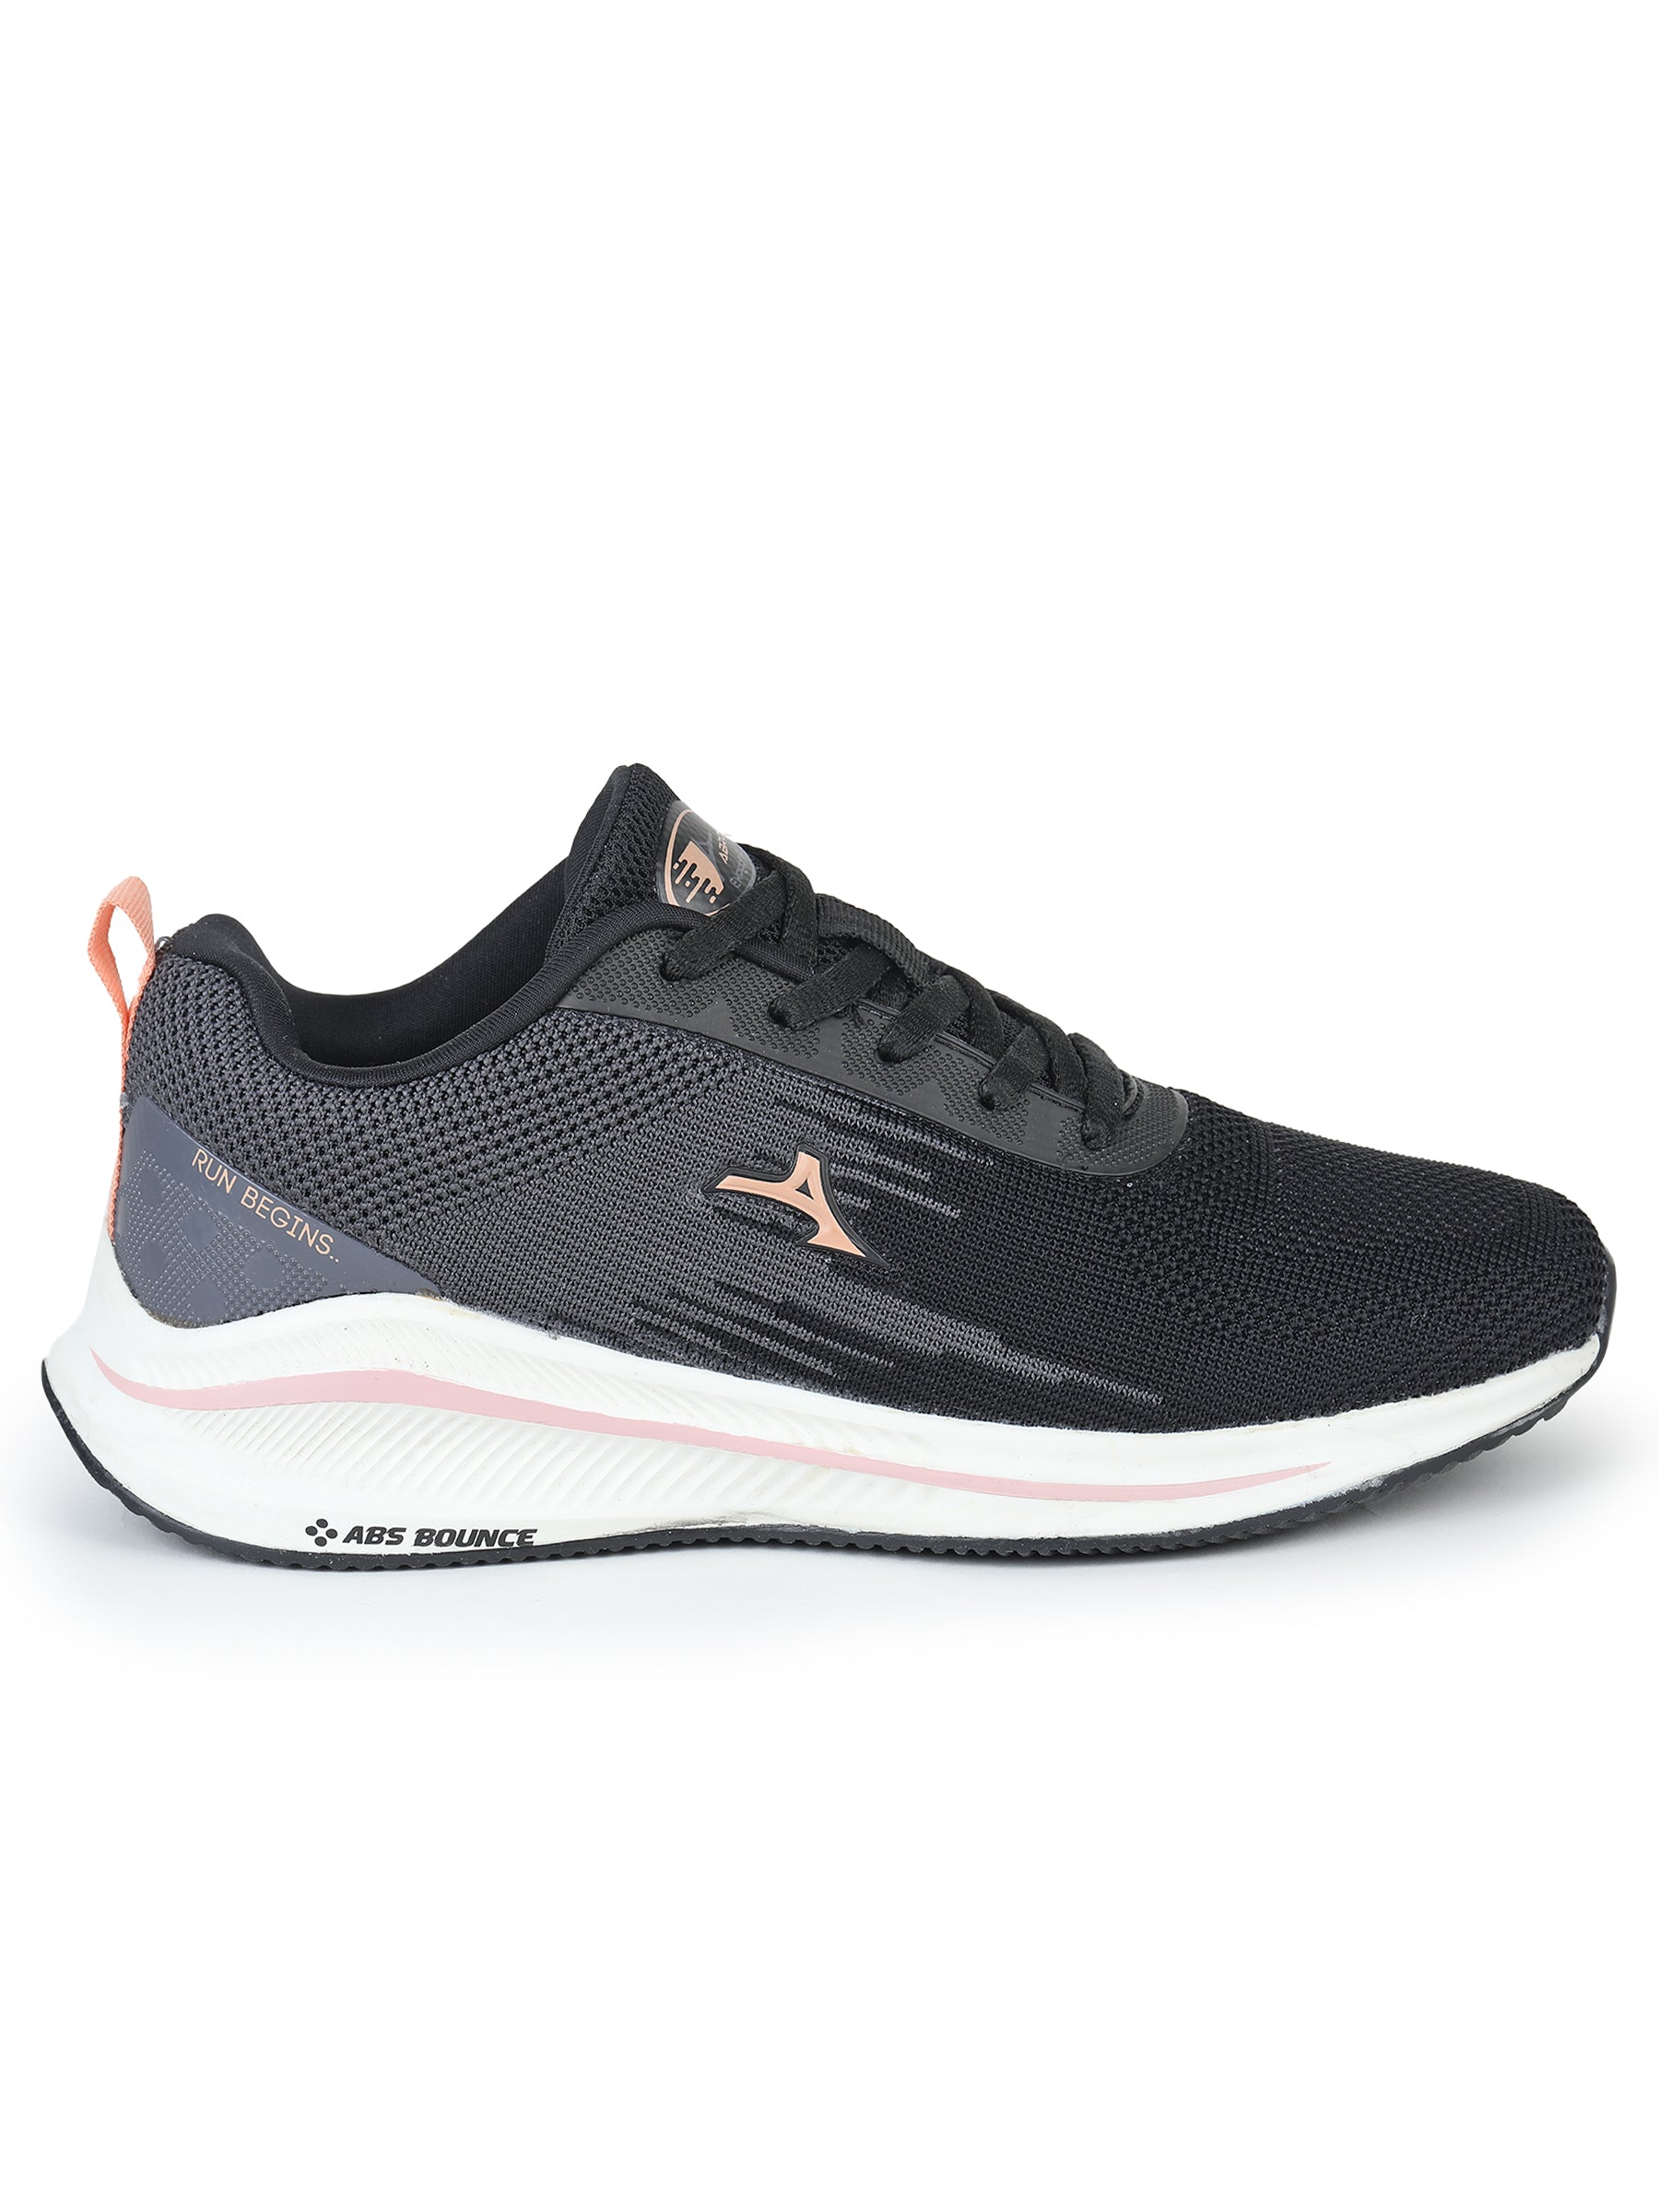 MELODY SPORTS SHOES FOR WOMEN